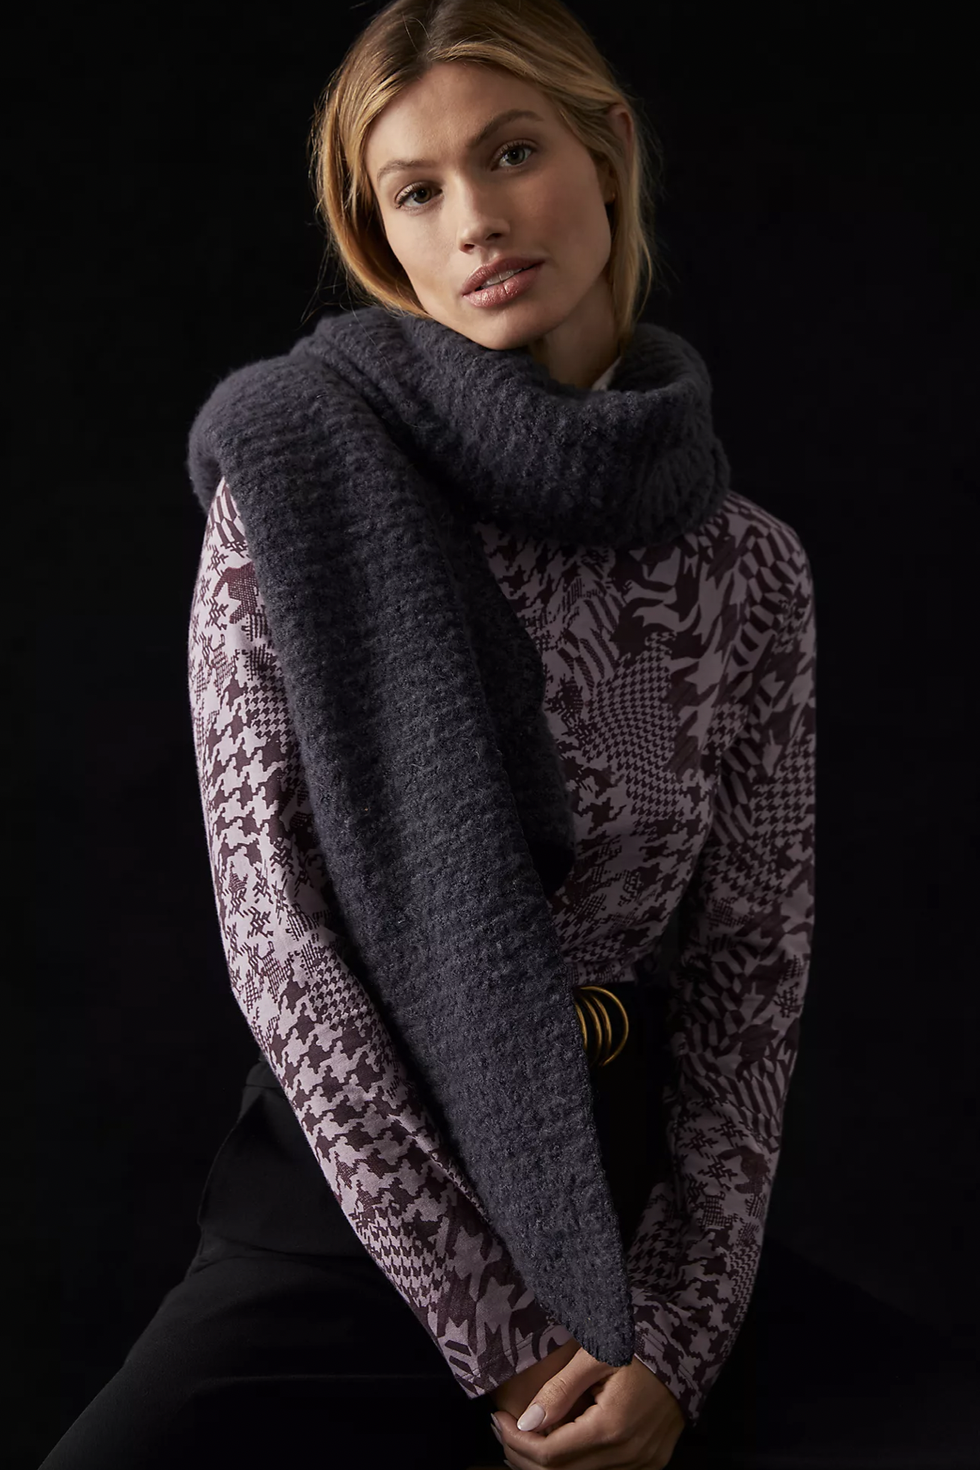 https://hips.hearstapps.com/vader-prod.s3.amazonaws.com/1669661689-anthropologie-winter-scarves-1669661664.png?crop=0.9983633387888707xw:1xh;center,top&resize=980:*